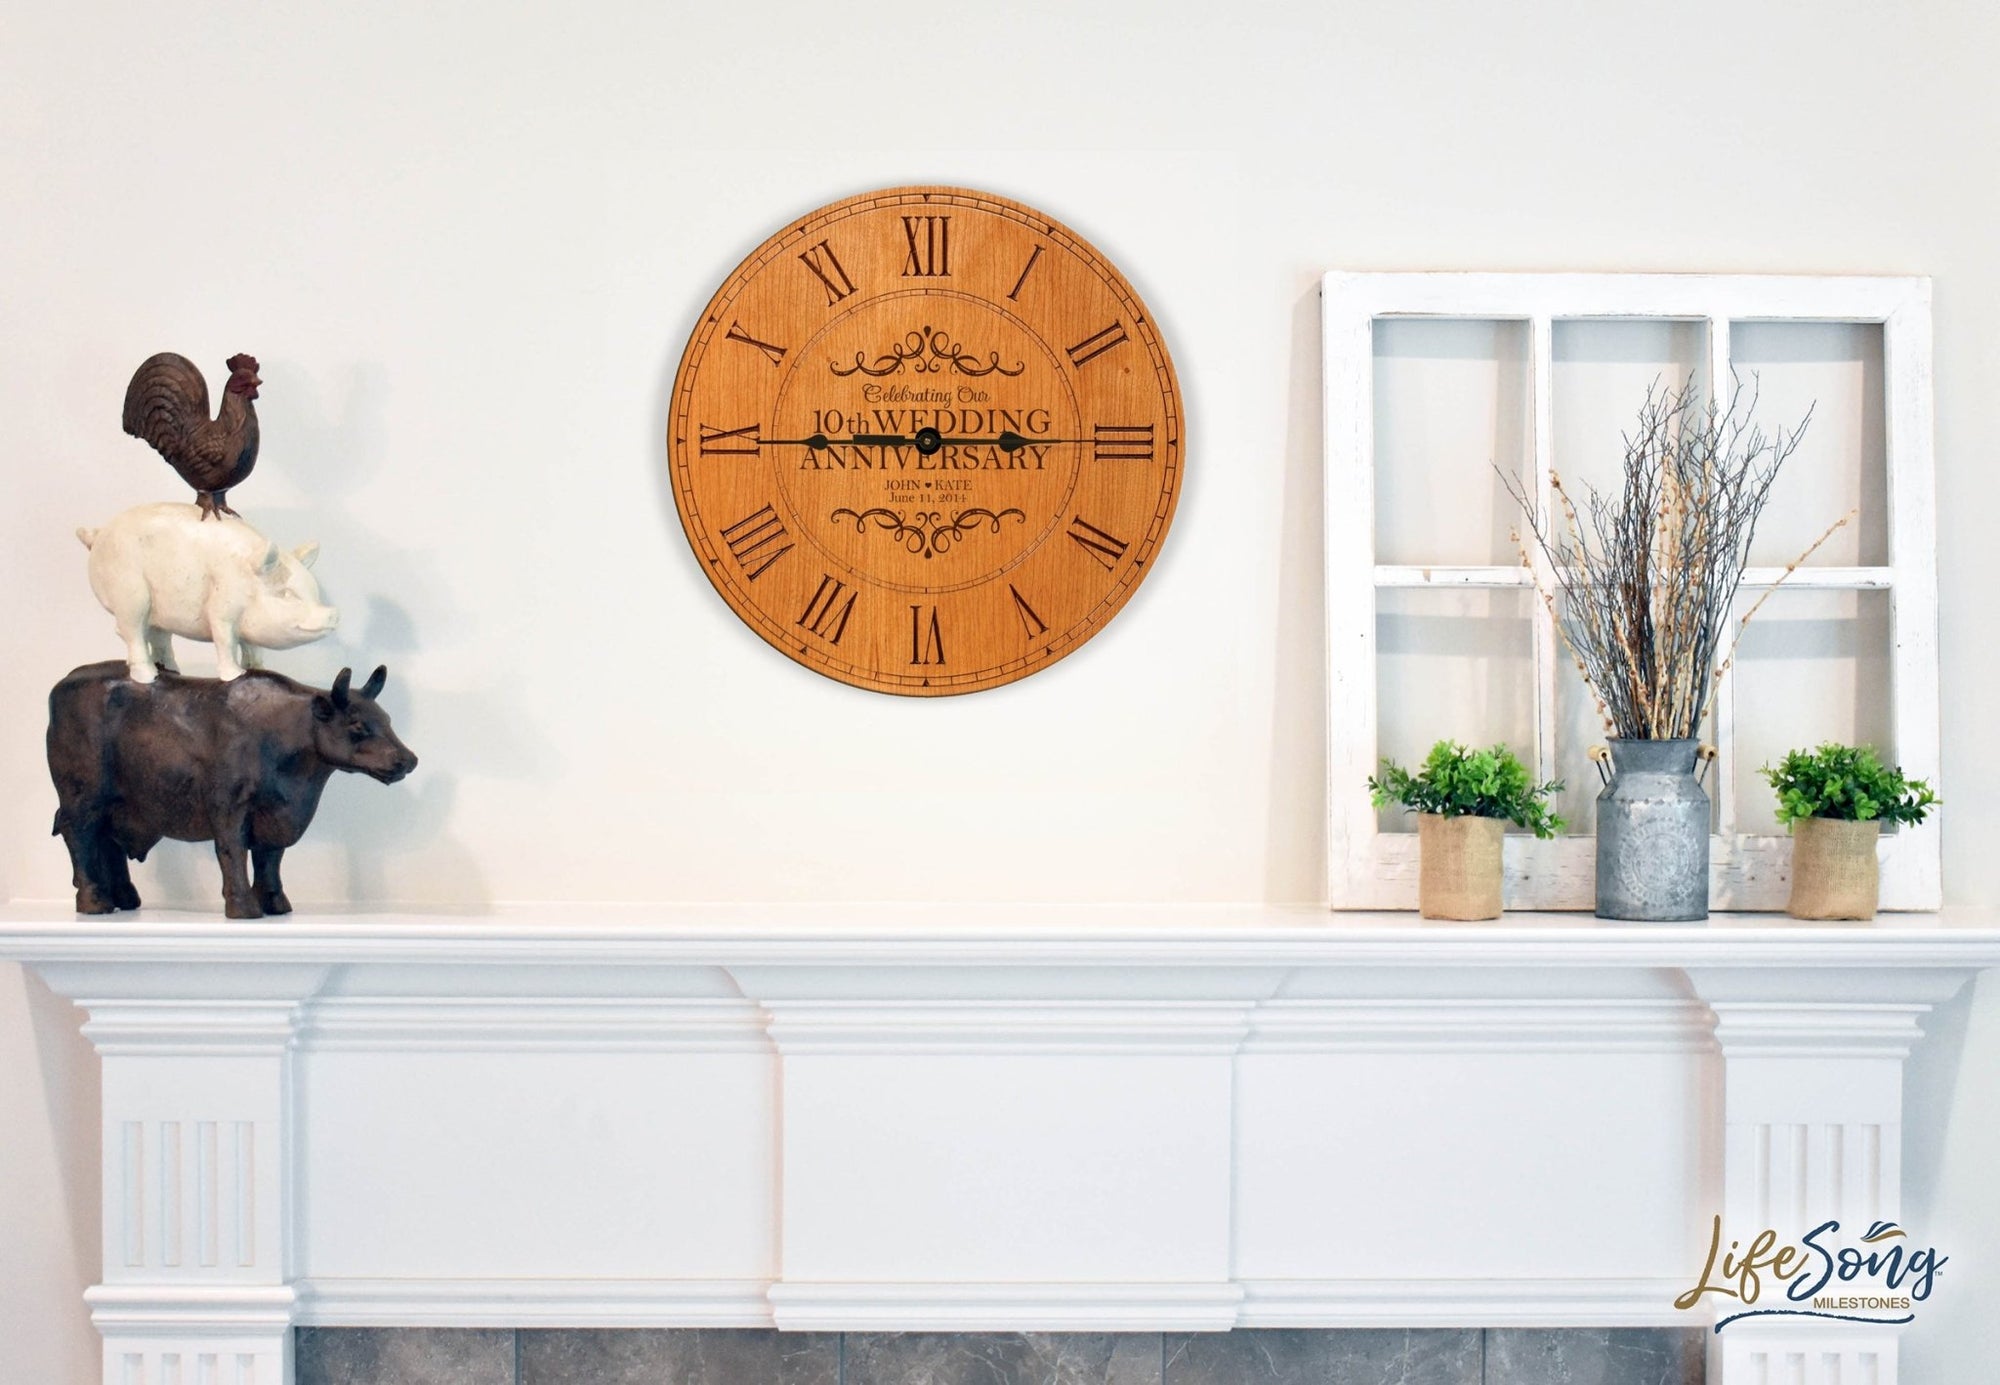 Personalized Engraved Wooden Wall Clock for 10th Wedding Anniversary Gift Ideas - LifeSong Milestones